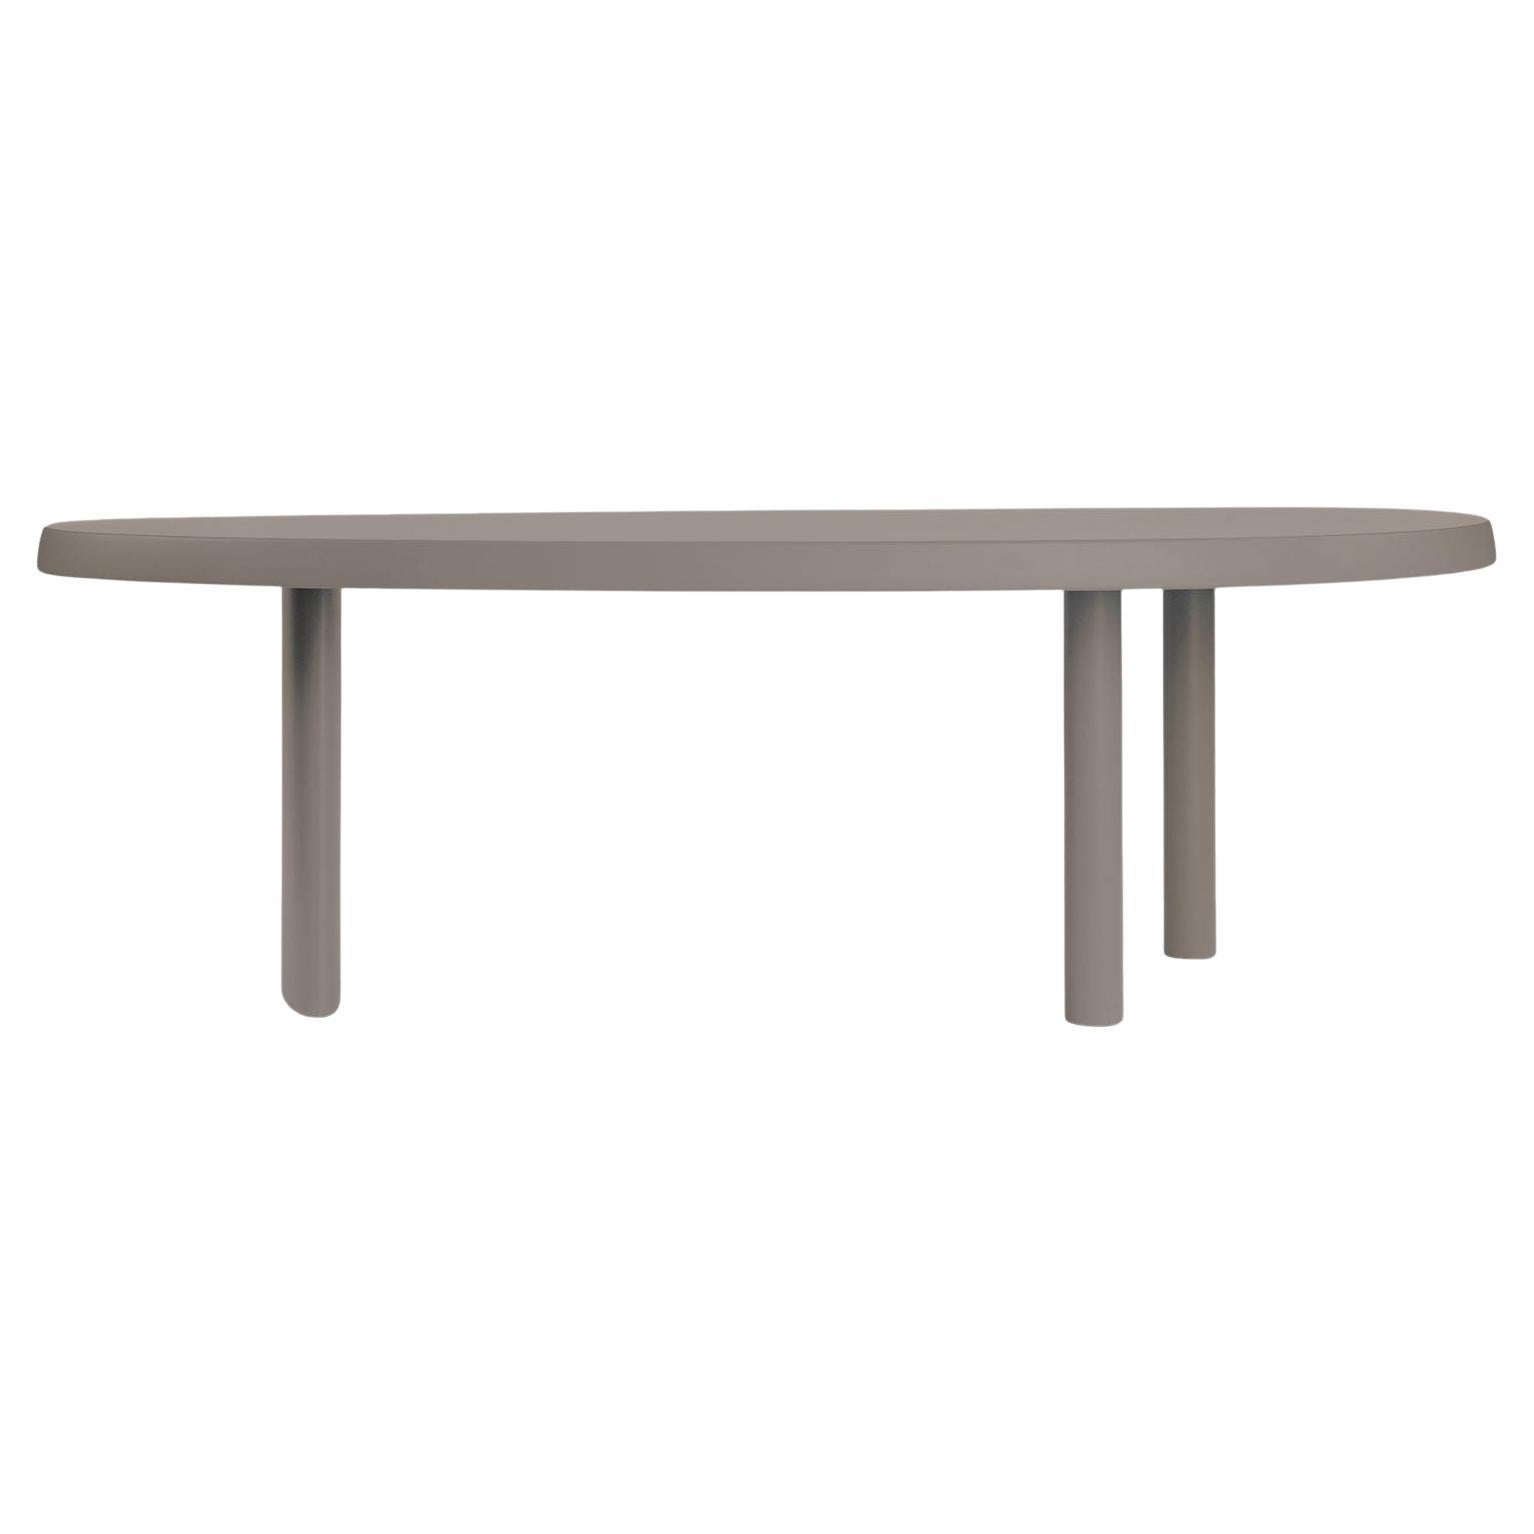 Mud Matte Lacquer Finished Solid Oak Dining Table, Cassina For Sale